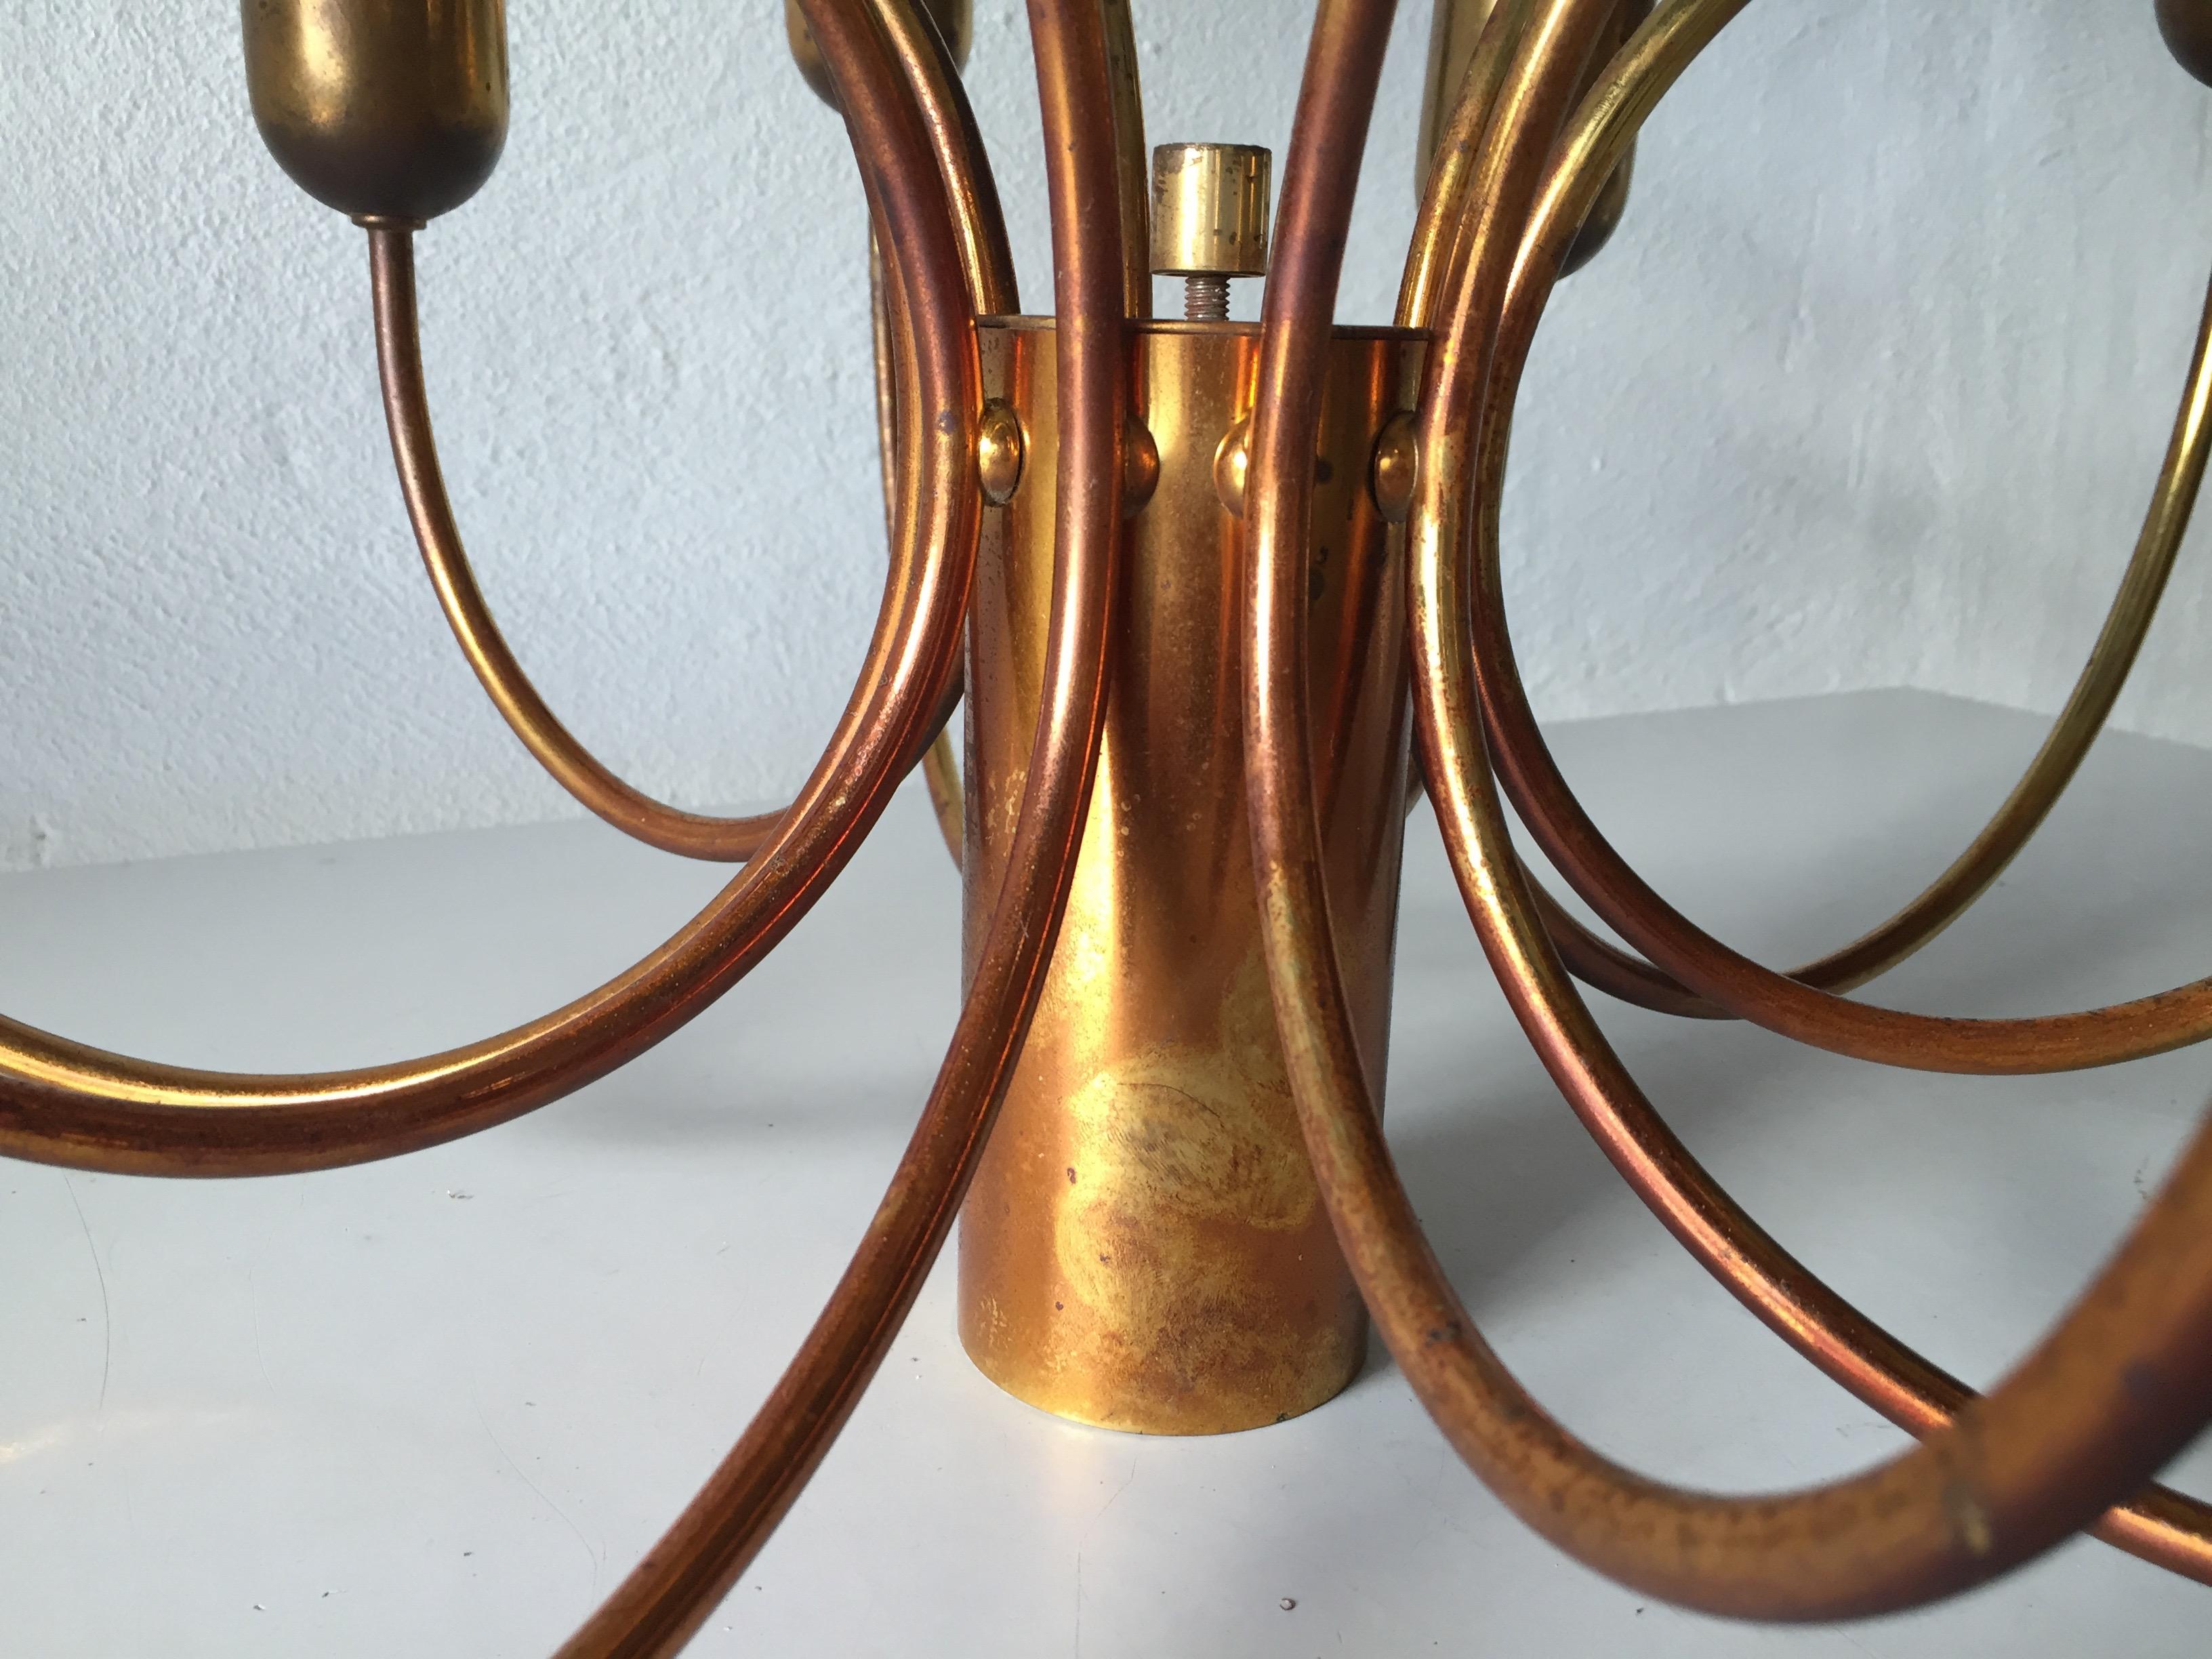 Rare 10 Arc Shaped Arms Full Brass Chandelier by Cosack Leuchten, 1970s Germany For Sale 15